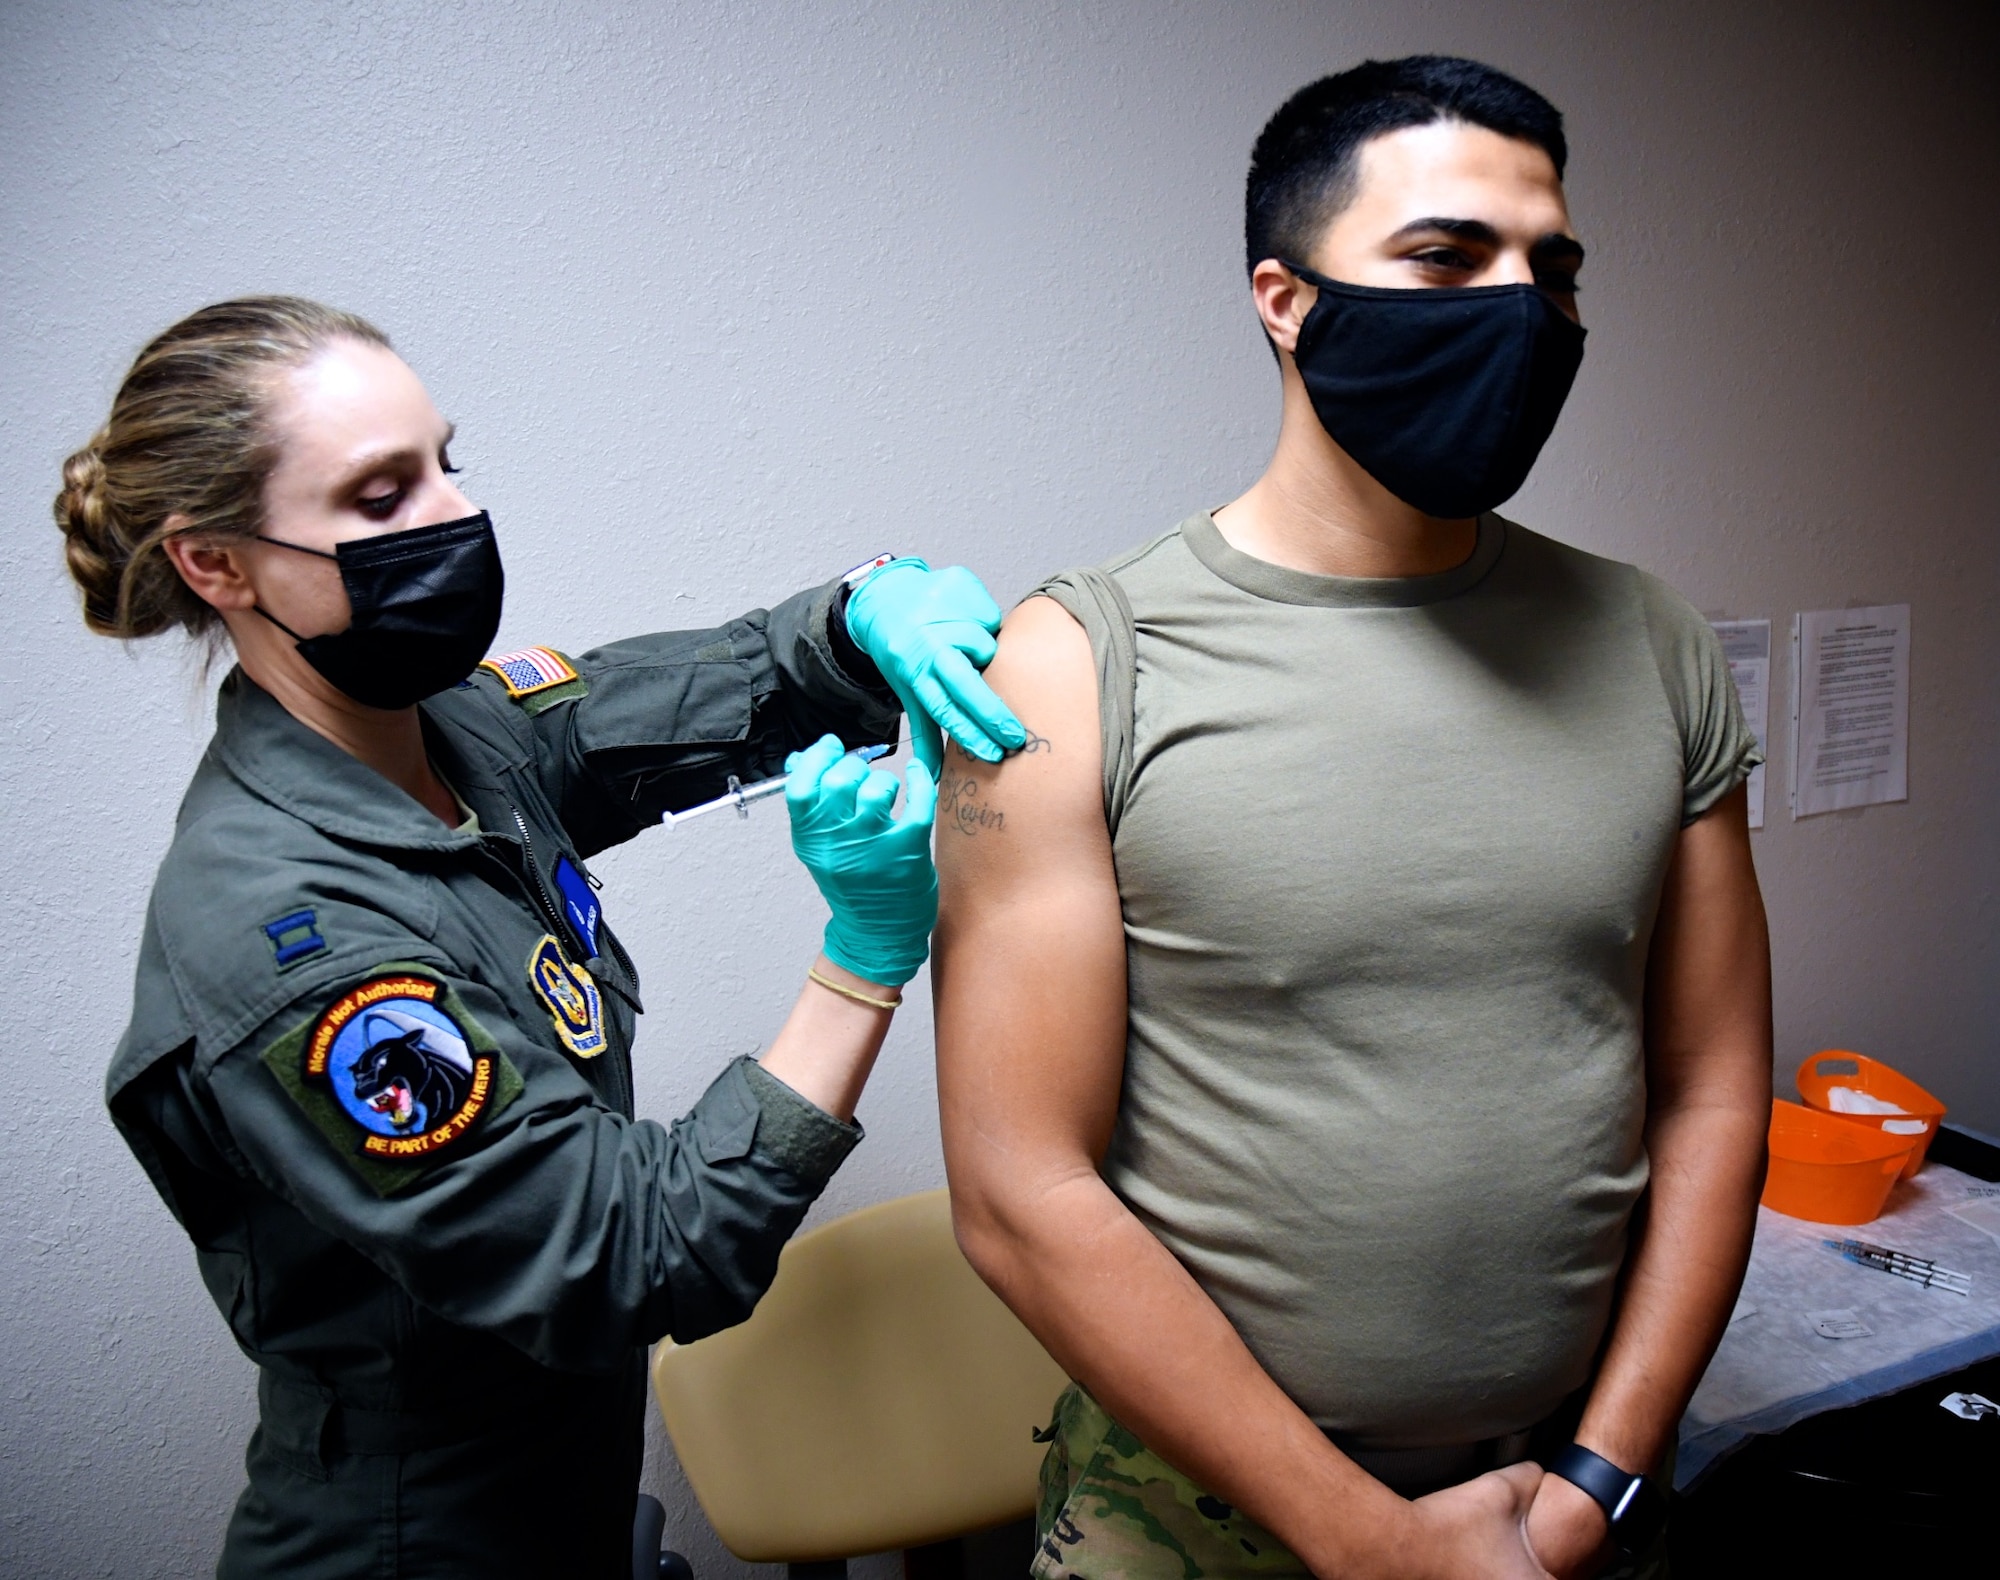 Senior Airman Warren McKeithen, 932nd Airlift Wing Medical Squadron health services administrator, receives a COVID-19 vaccine shot from Capt. Jessica Walser, a 932nd MDS critical care air transport nurse, at the 375th Medical Group Clinic, Scott Air Force Base, Ill., on Feb. 9, 2021. The vaccines were recently approved by the Food and Drug Administration under an emergency use authorization, and are currently offered to DoD personnel on a voluntary basis.  They are distributed using the Department of Defense’s phased approach. McKeithen noted, "if medical gets called out to assist with someone that's COVID positive the shot definitely helps protect us in the long run."  McKeithen handles a multitude of duties including orders and readiness related areas in the Air Force Reserve medical unit.  (U.S. Air Force photo by Lt. Col. Stan Paregien)